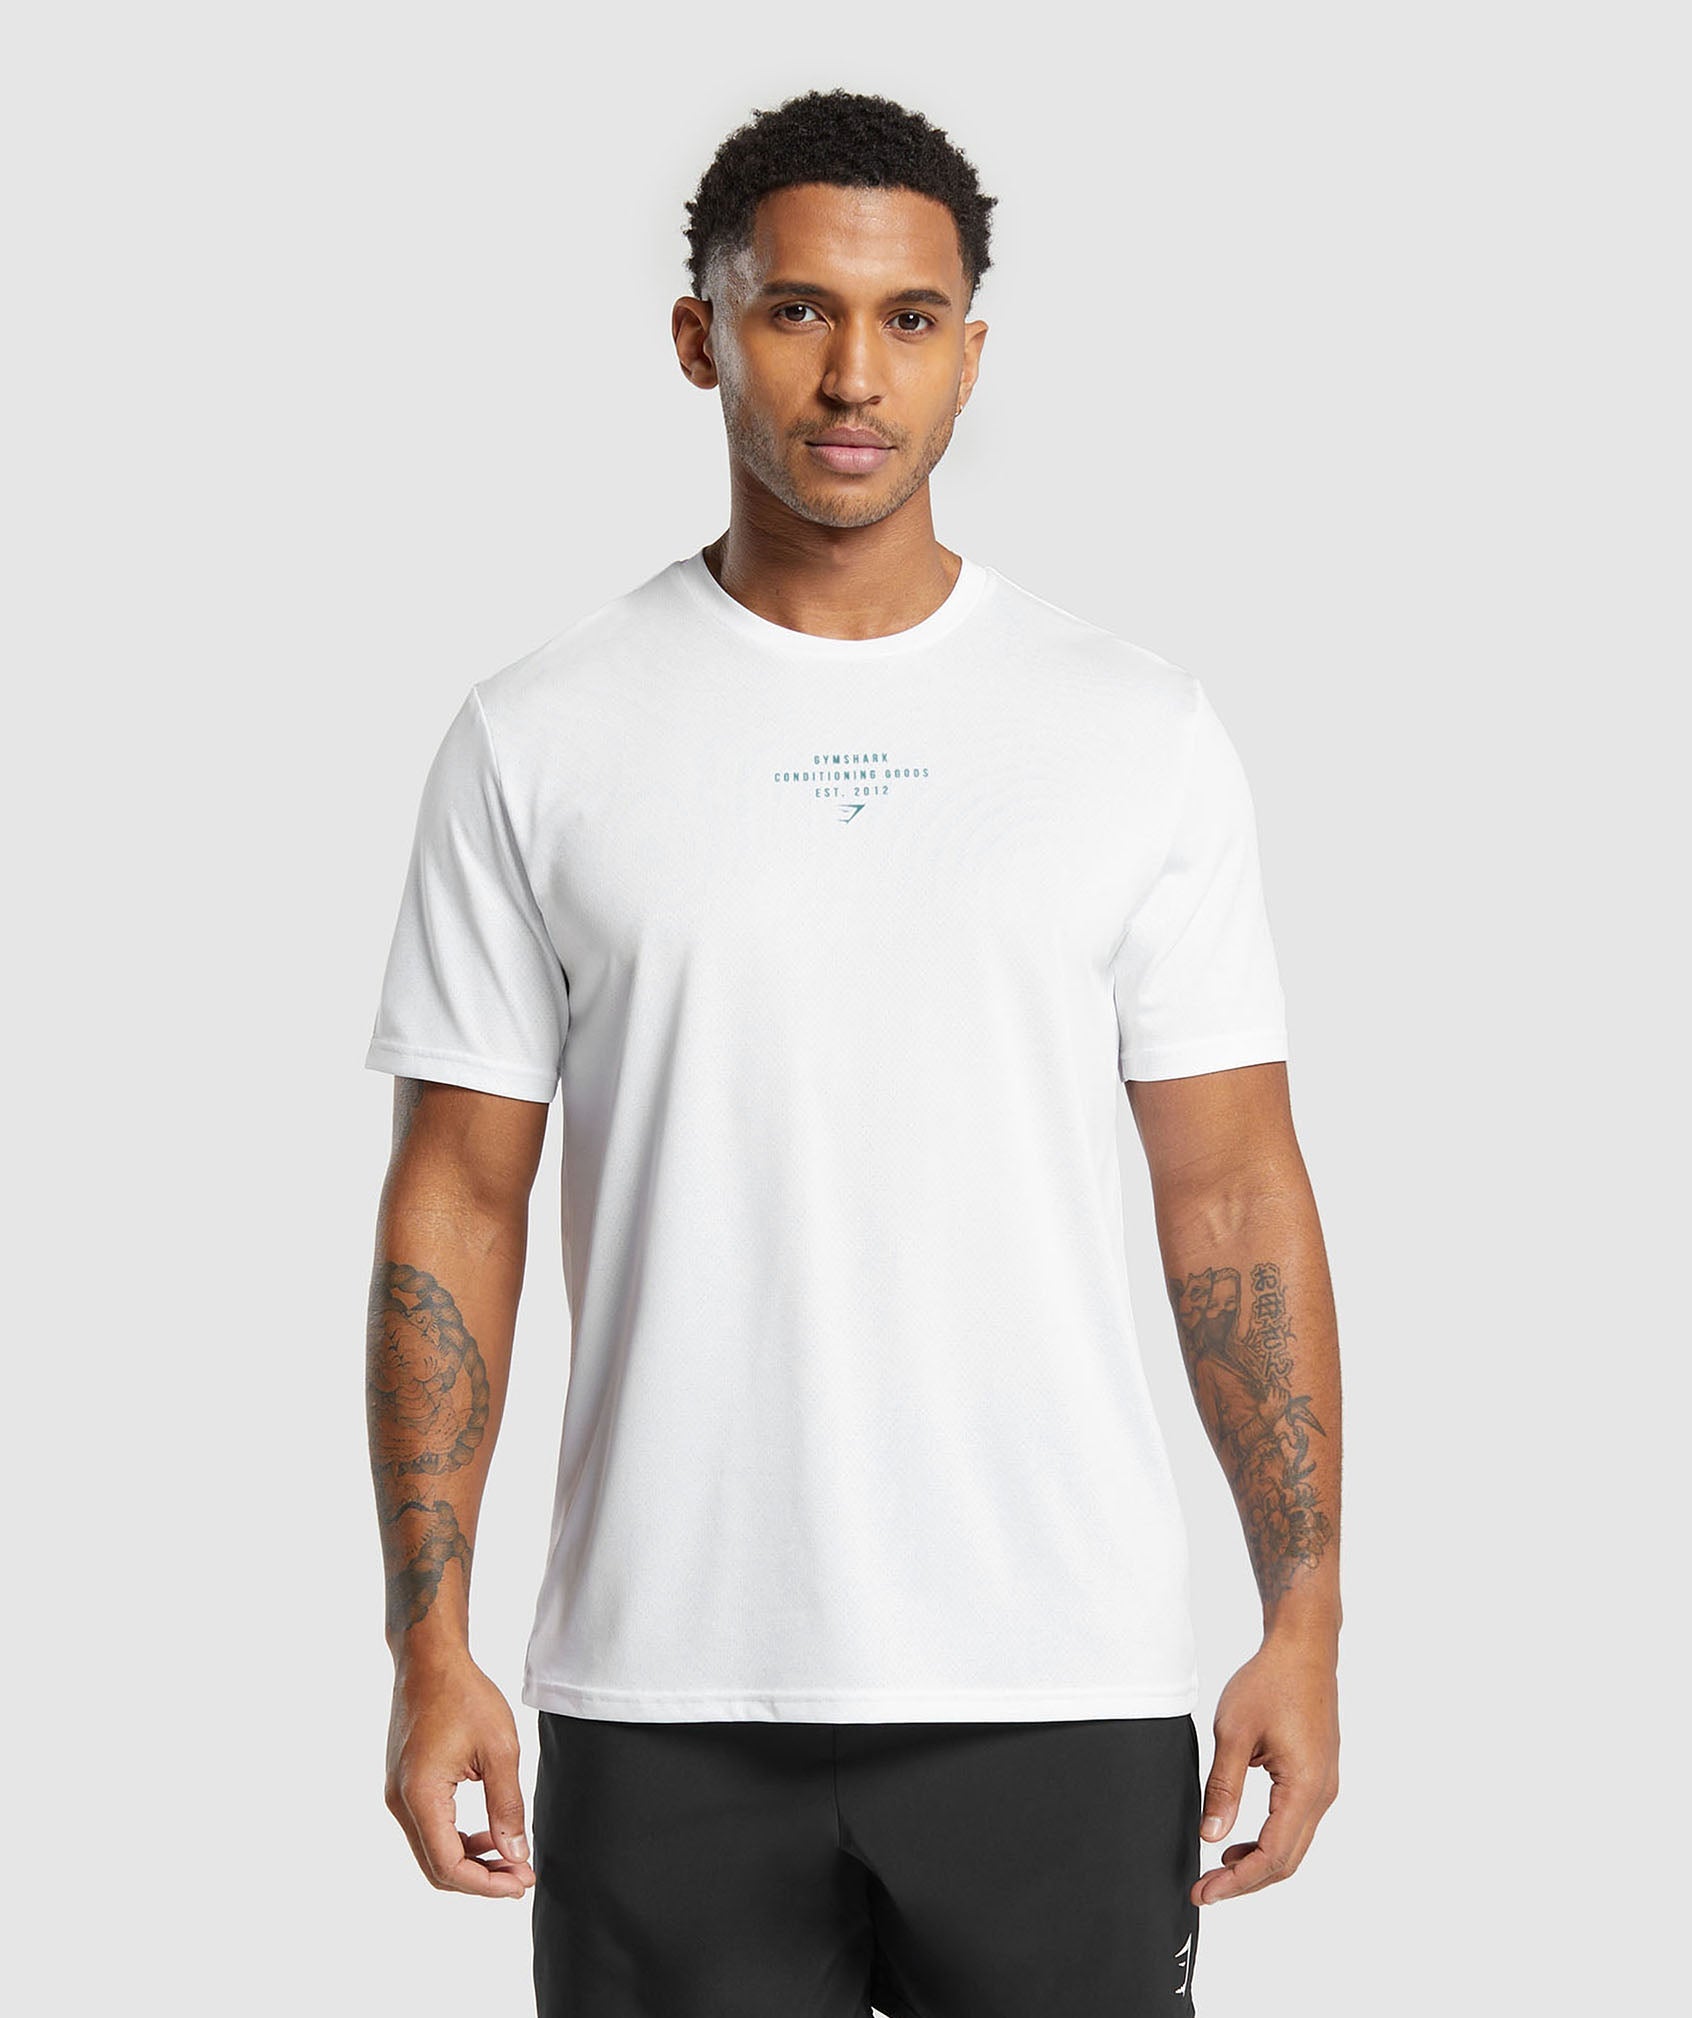 Conditioning Goods T-Shirt in White